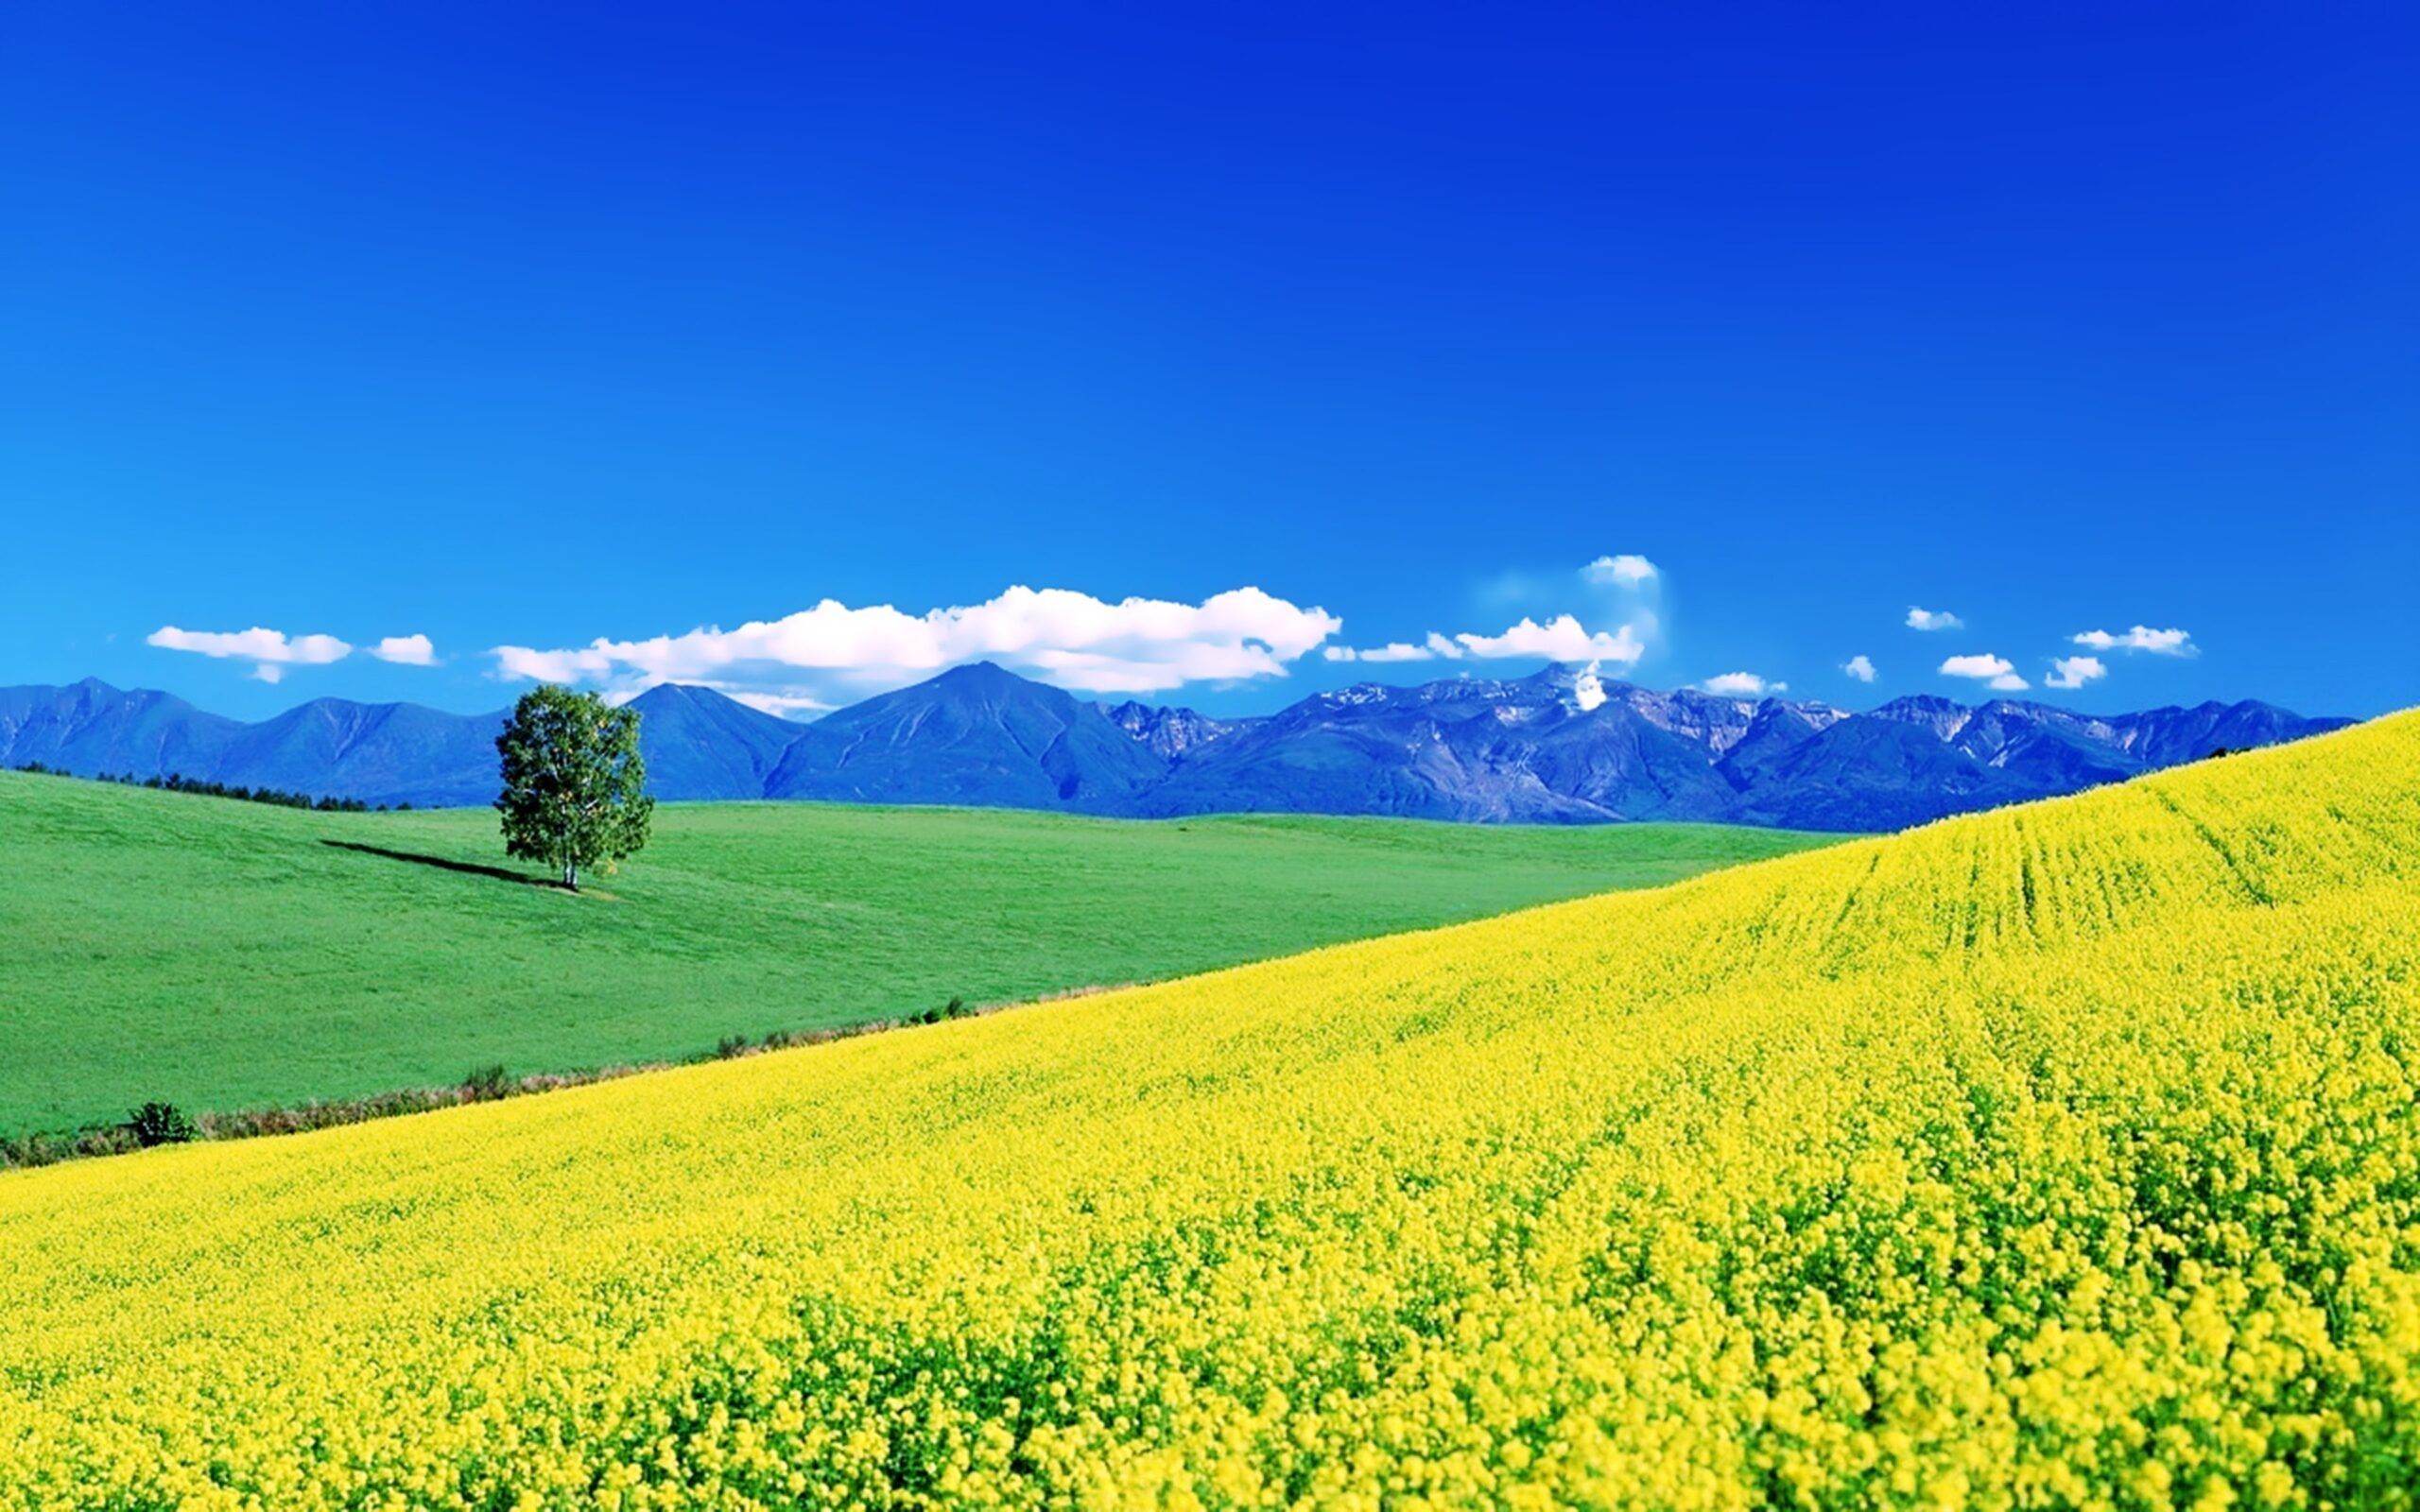 Trees, Hills, Landscapes, Earth, Green, Mountains, Grass, Fields, Stock Image, Picture, flowers, HD Wallpaper, Yellow, Apple, Spring, Beauty, Mobile Wallpaper, Sky Sunny, Nature